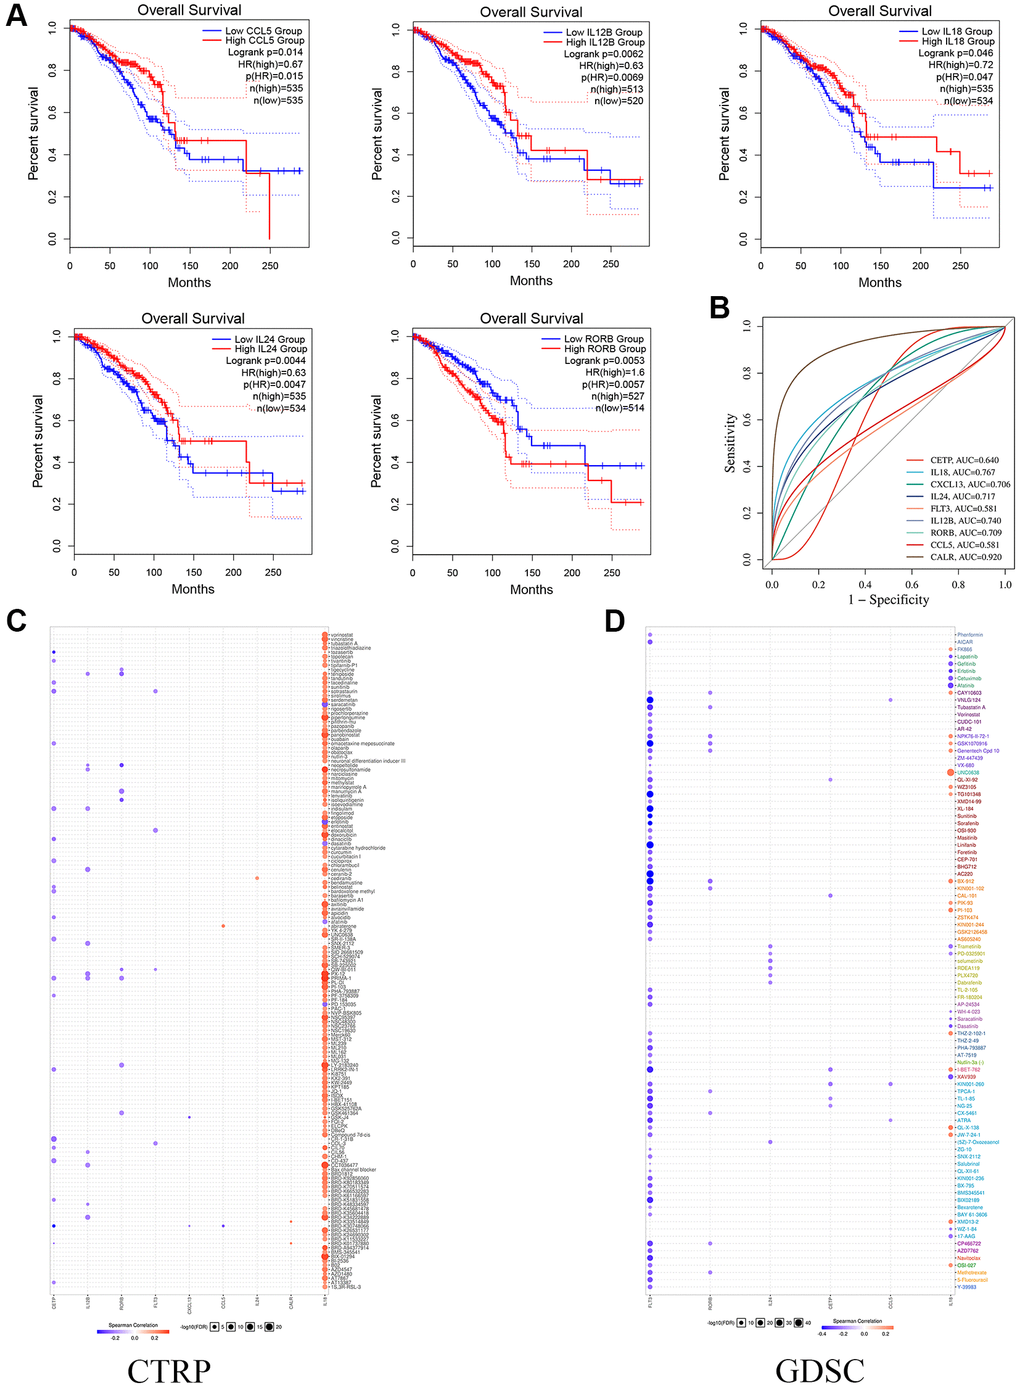 The Functional effects of prognostic genes. (A) Kaplan-Meier curves show the survival of single gene OS in prognostic model. (B) The ROC analysis of model gene. (C, D) The CTRP and CDSC databases show potential targets for prognostic genes.